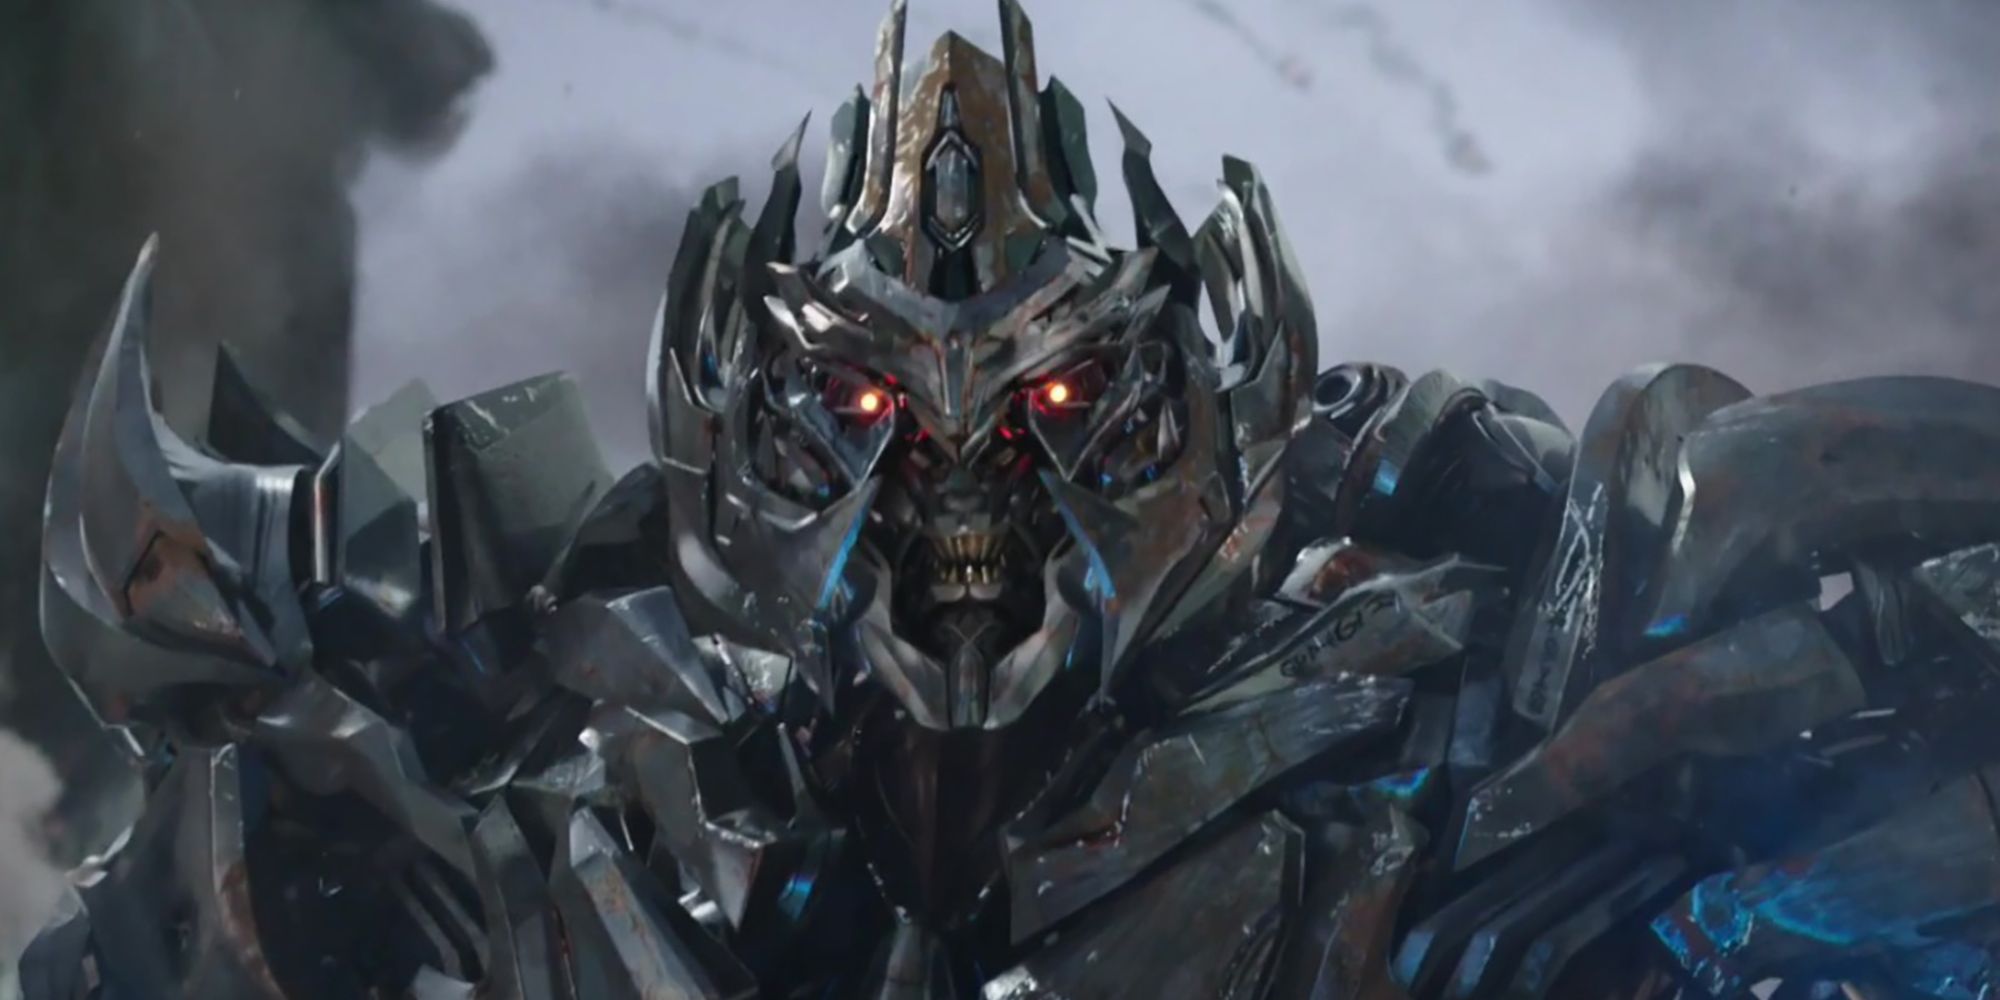 megatron from live-action transformers movies